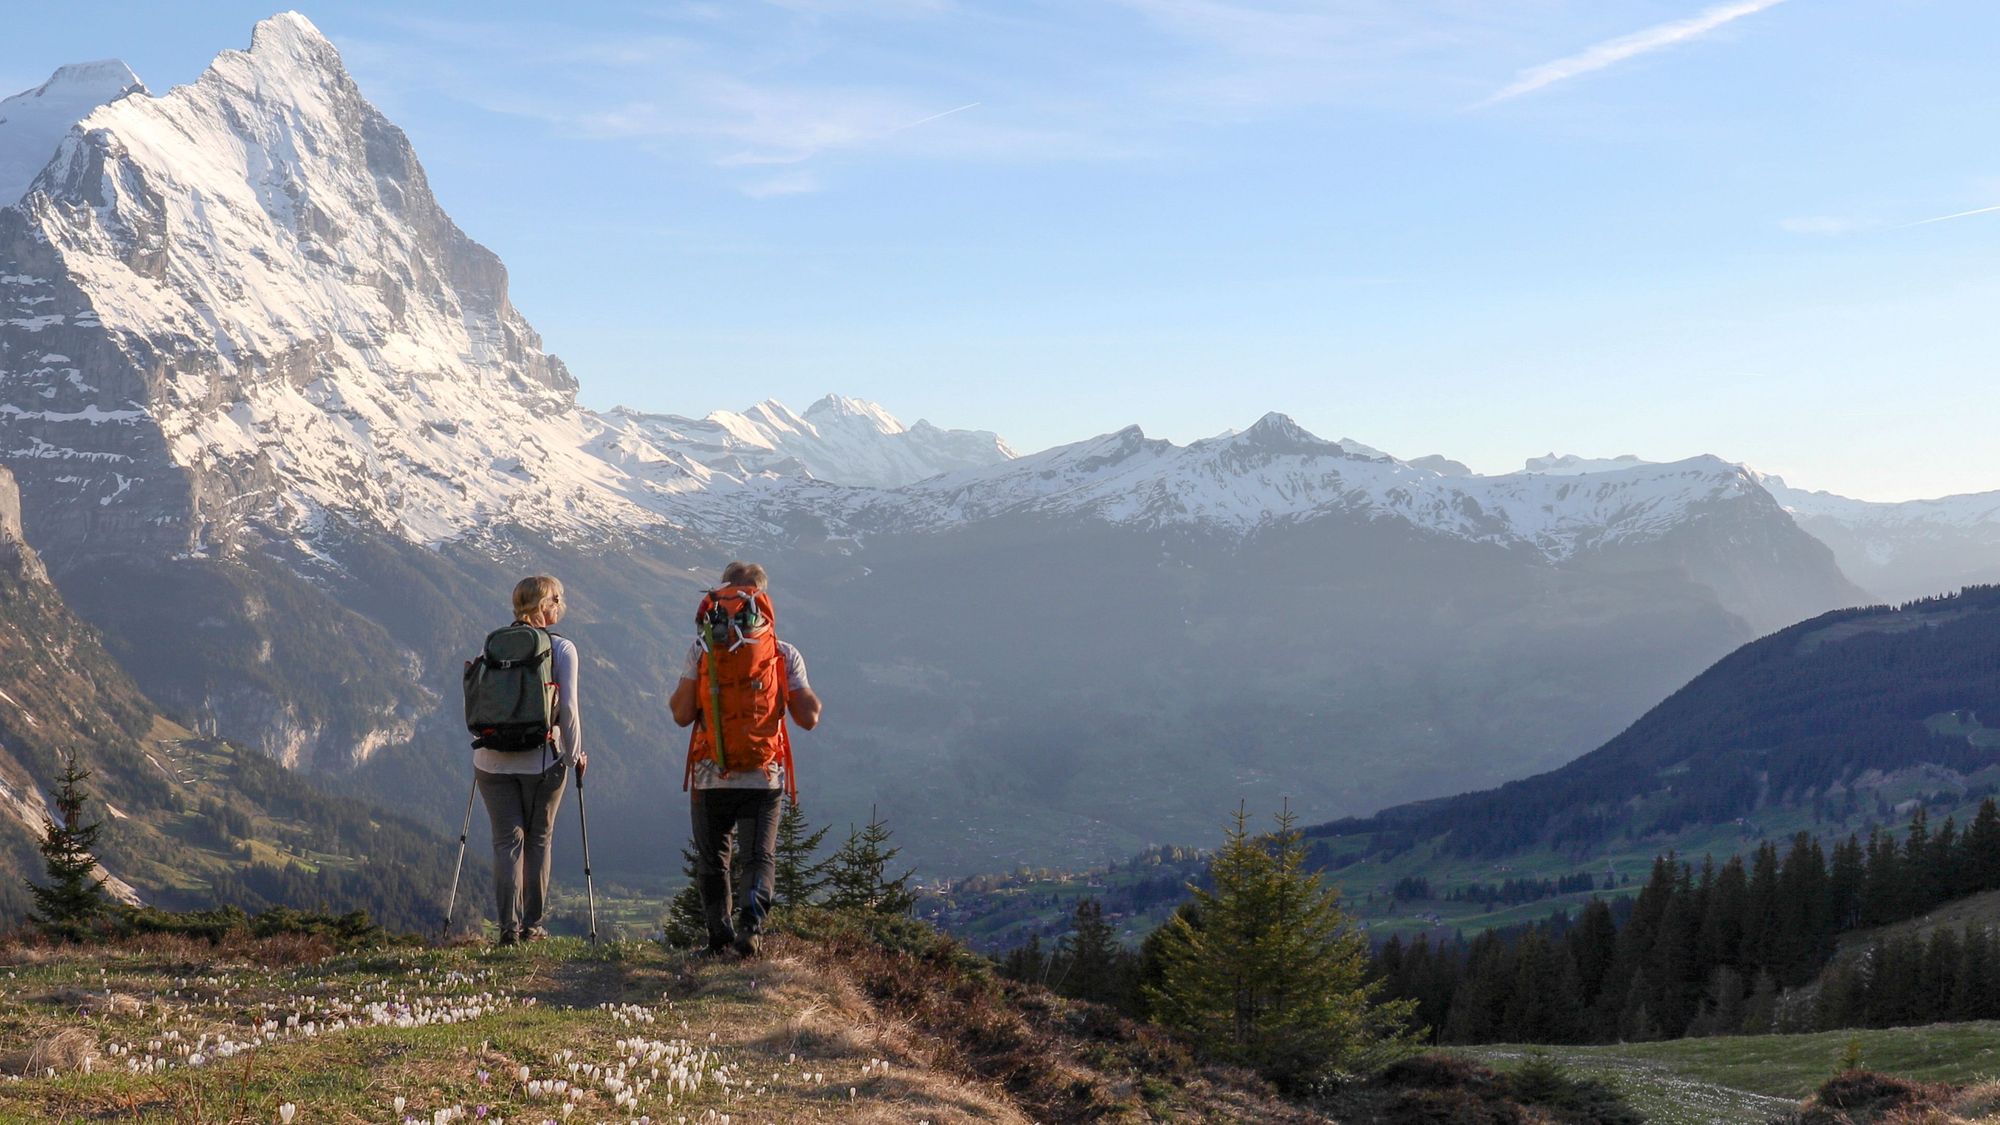 A couple looking out on a sublime view of the Matterhorn, one of the most iconic mountains in the world. Photo: Getty